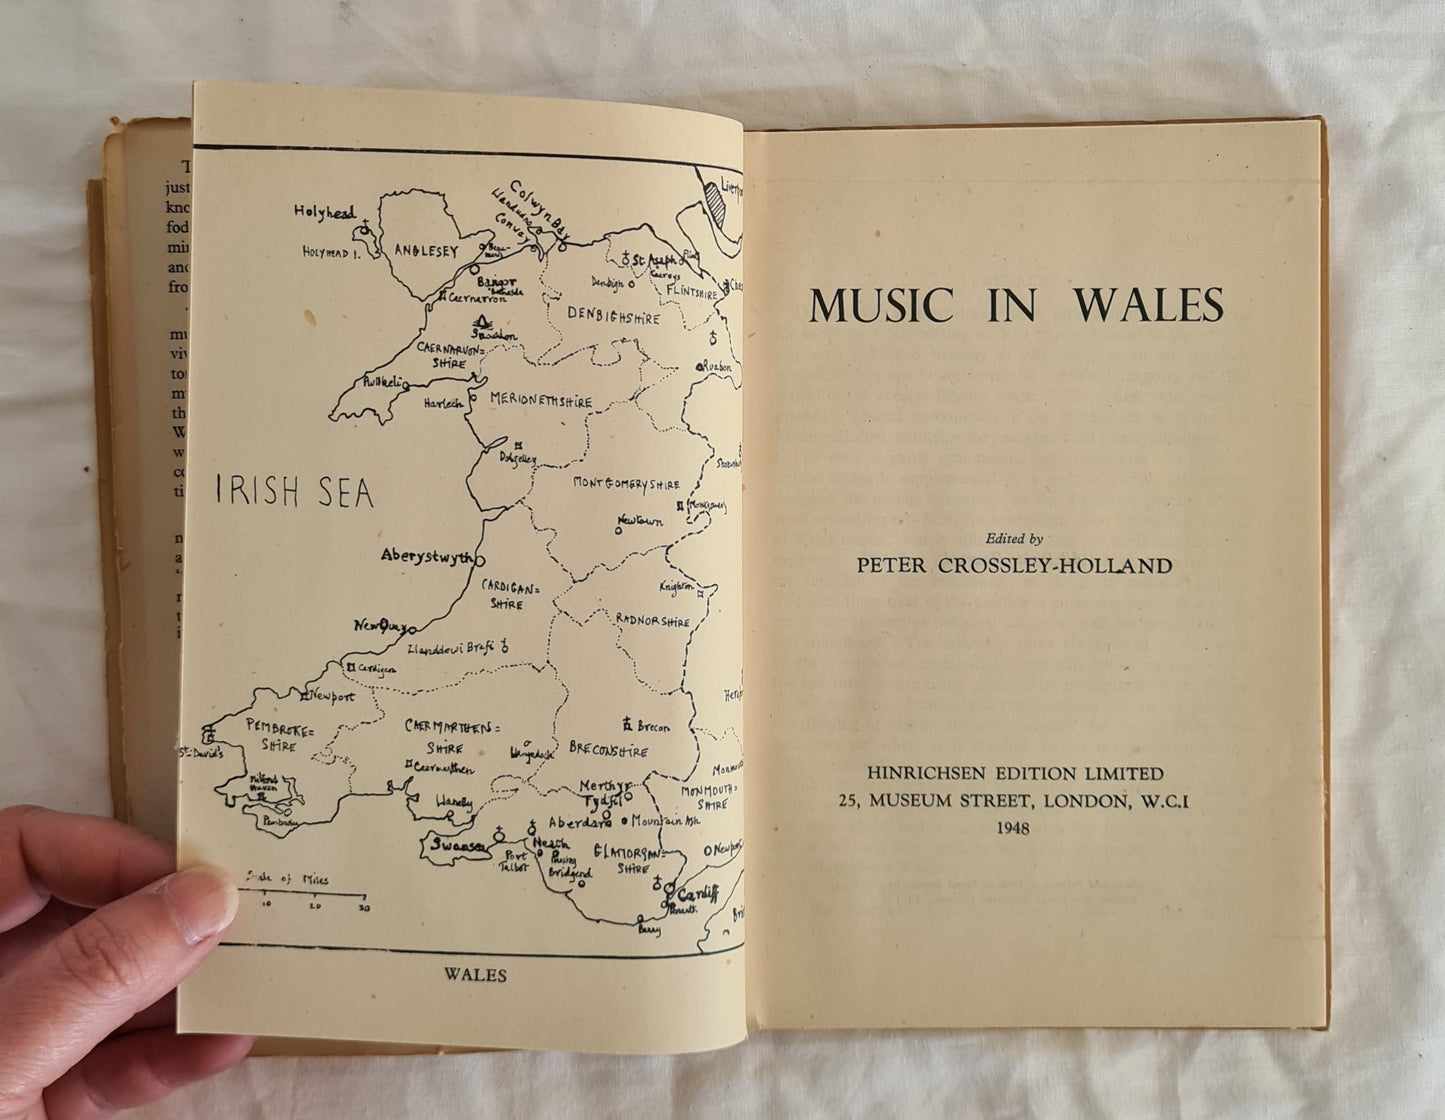 Music in Wales by Peter Crossley-Holland